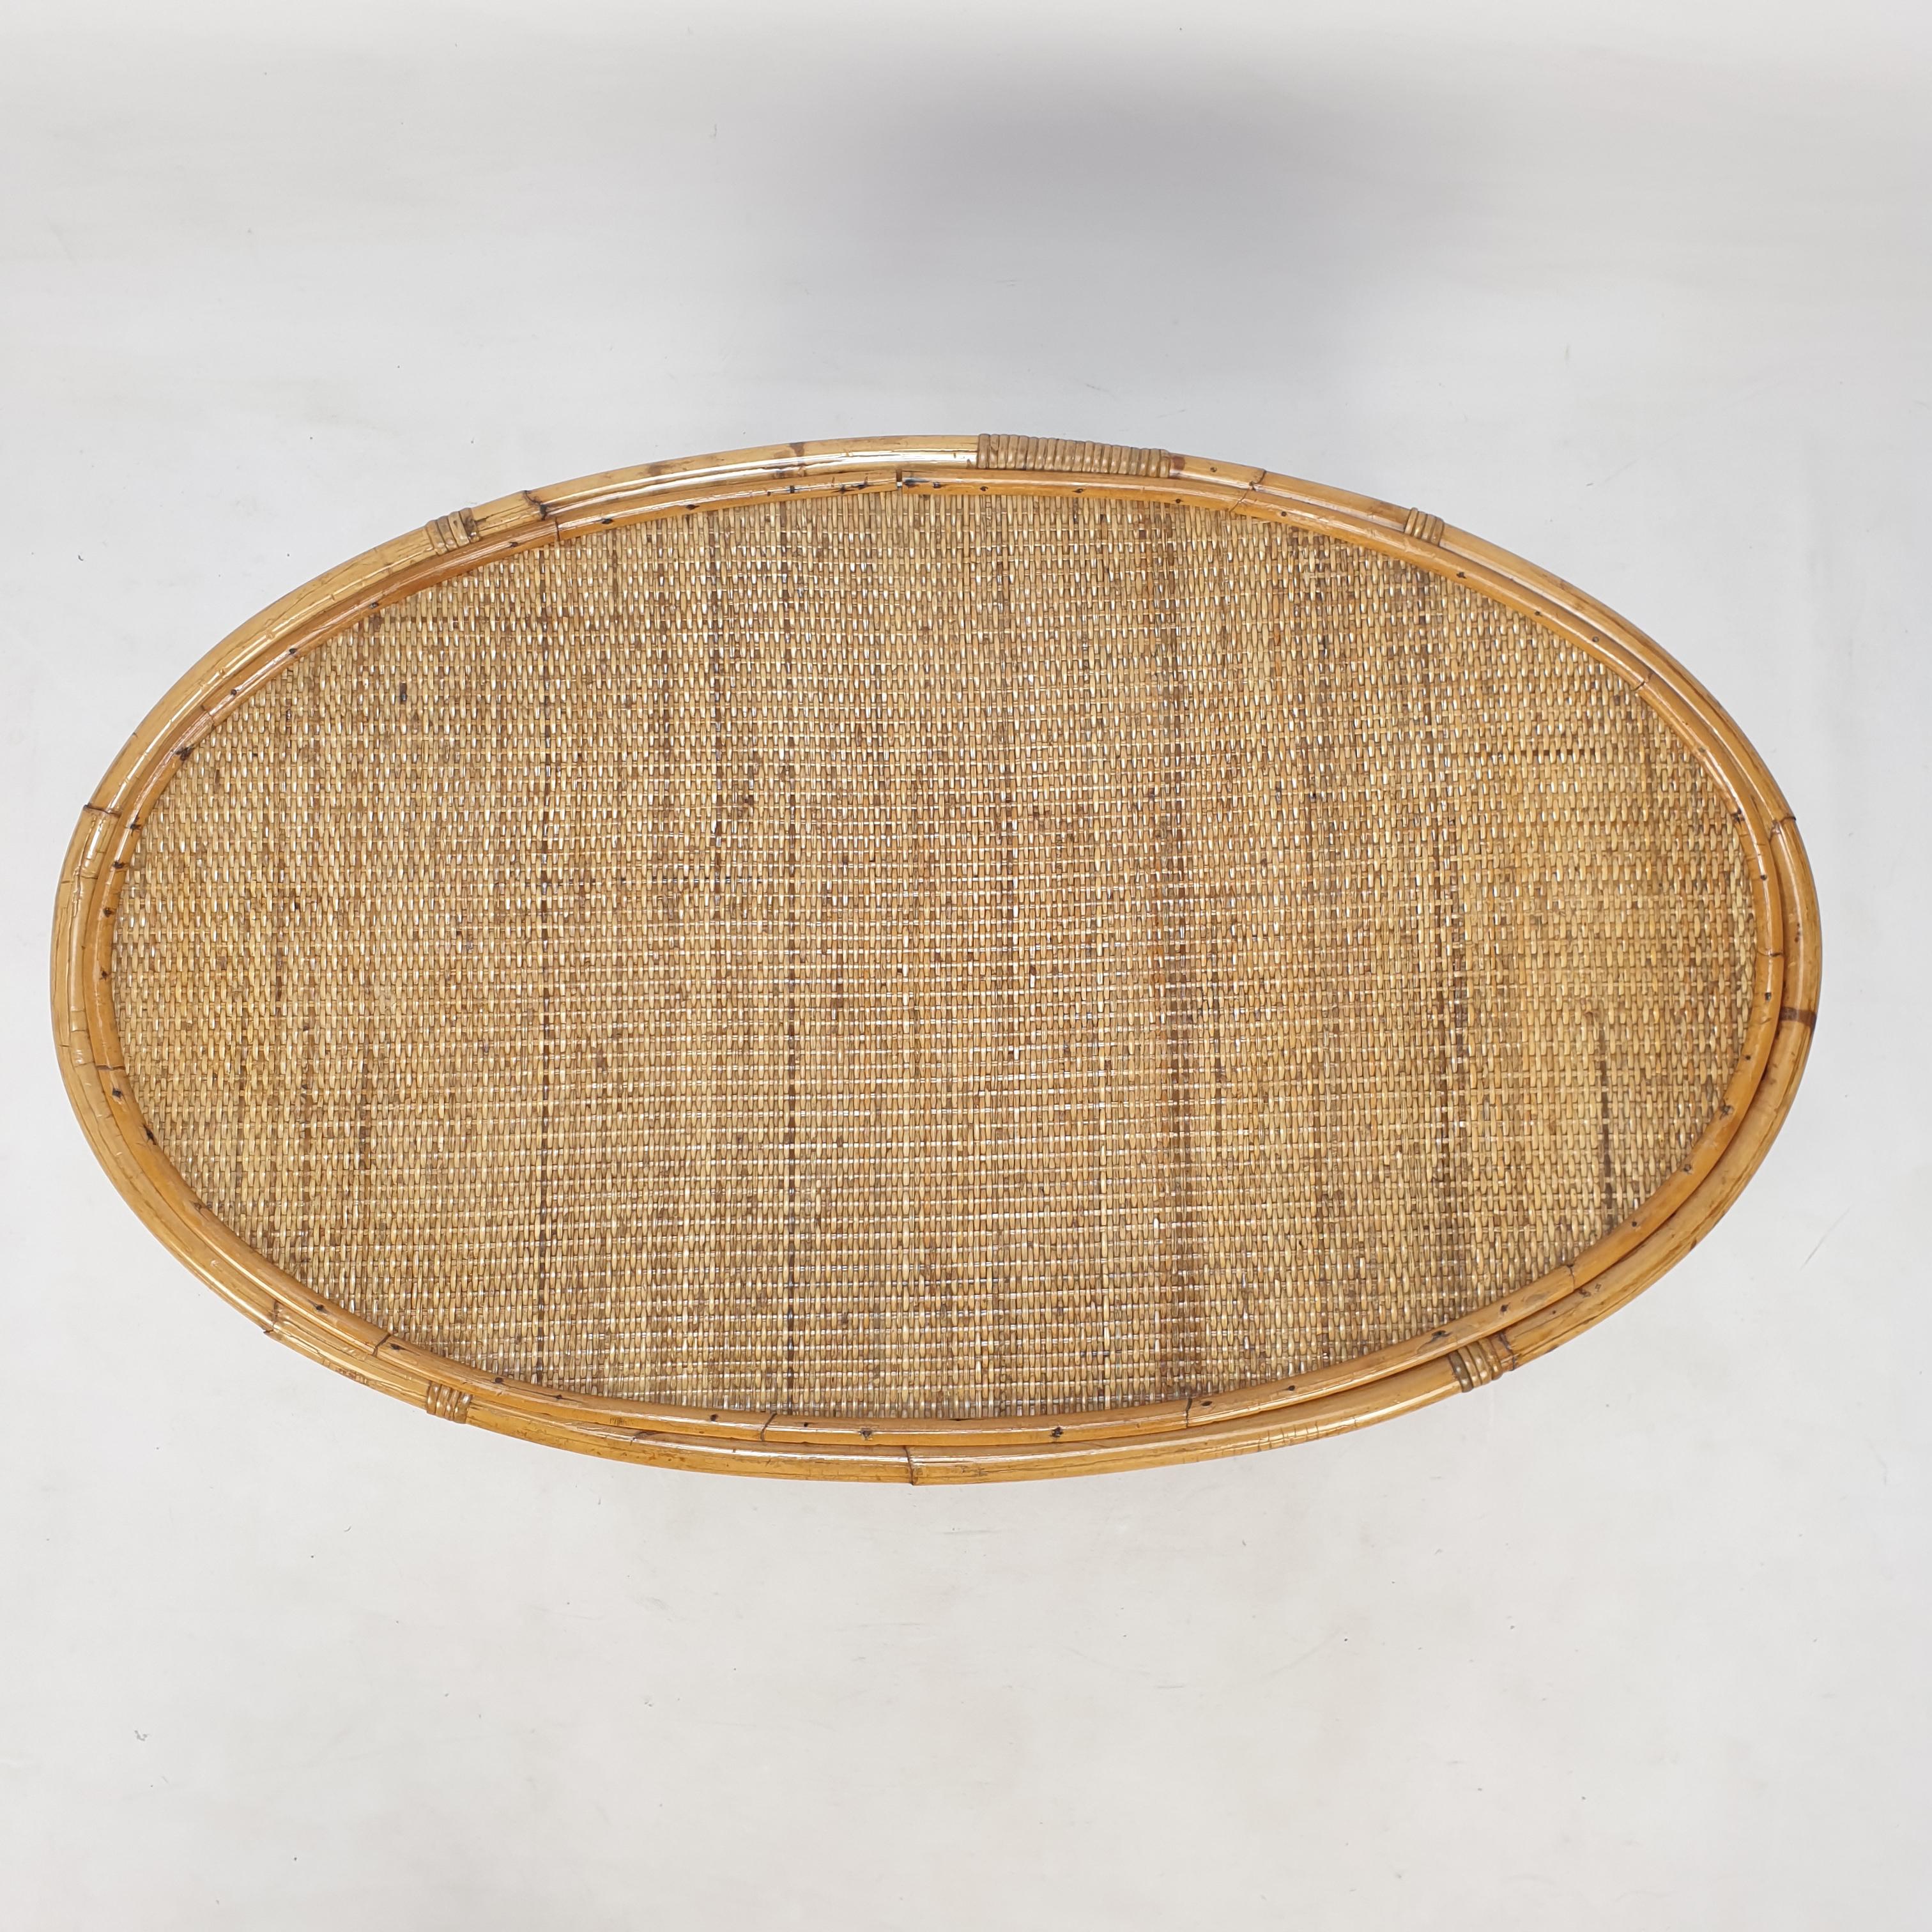 Italian Wicker and Rattan Coffee Table, 1960s For Sale 3